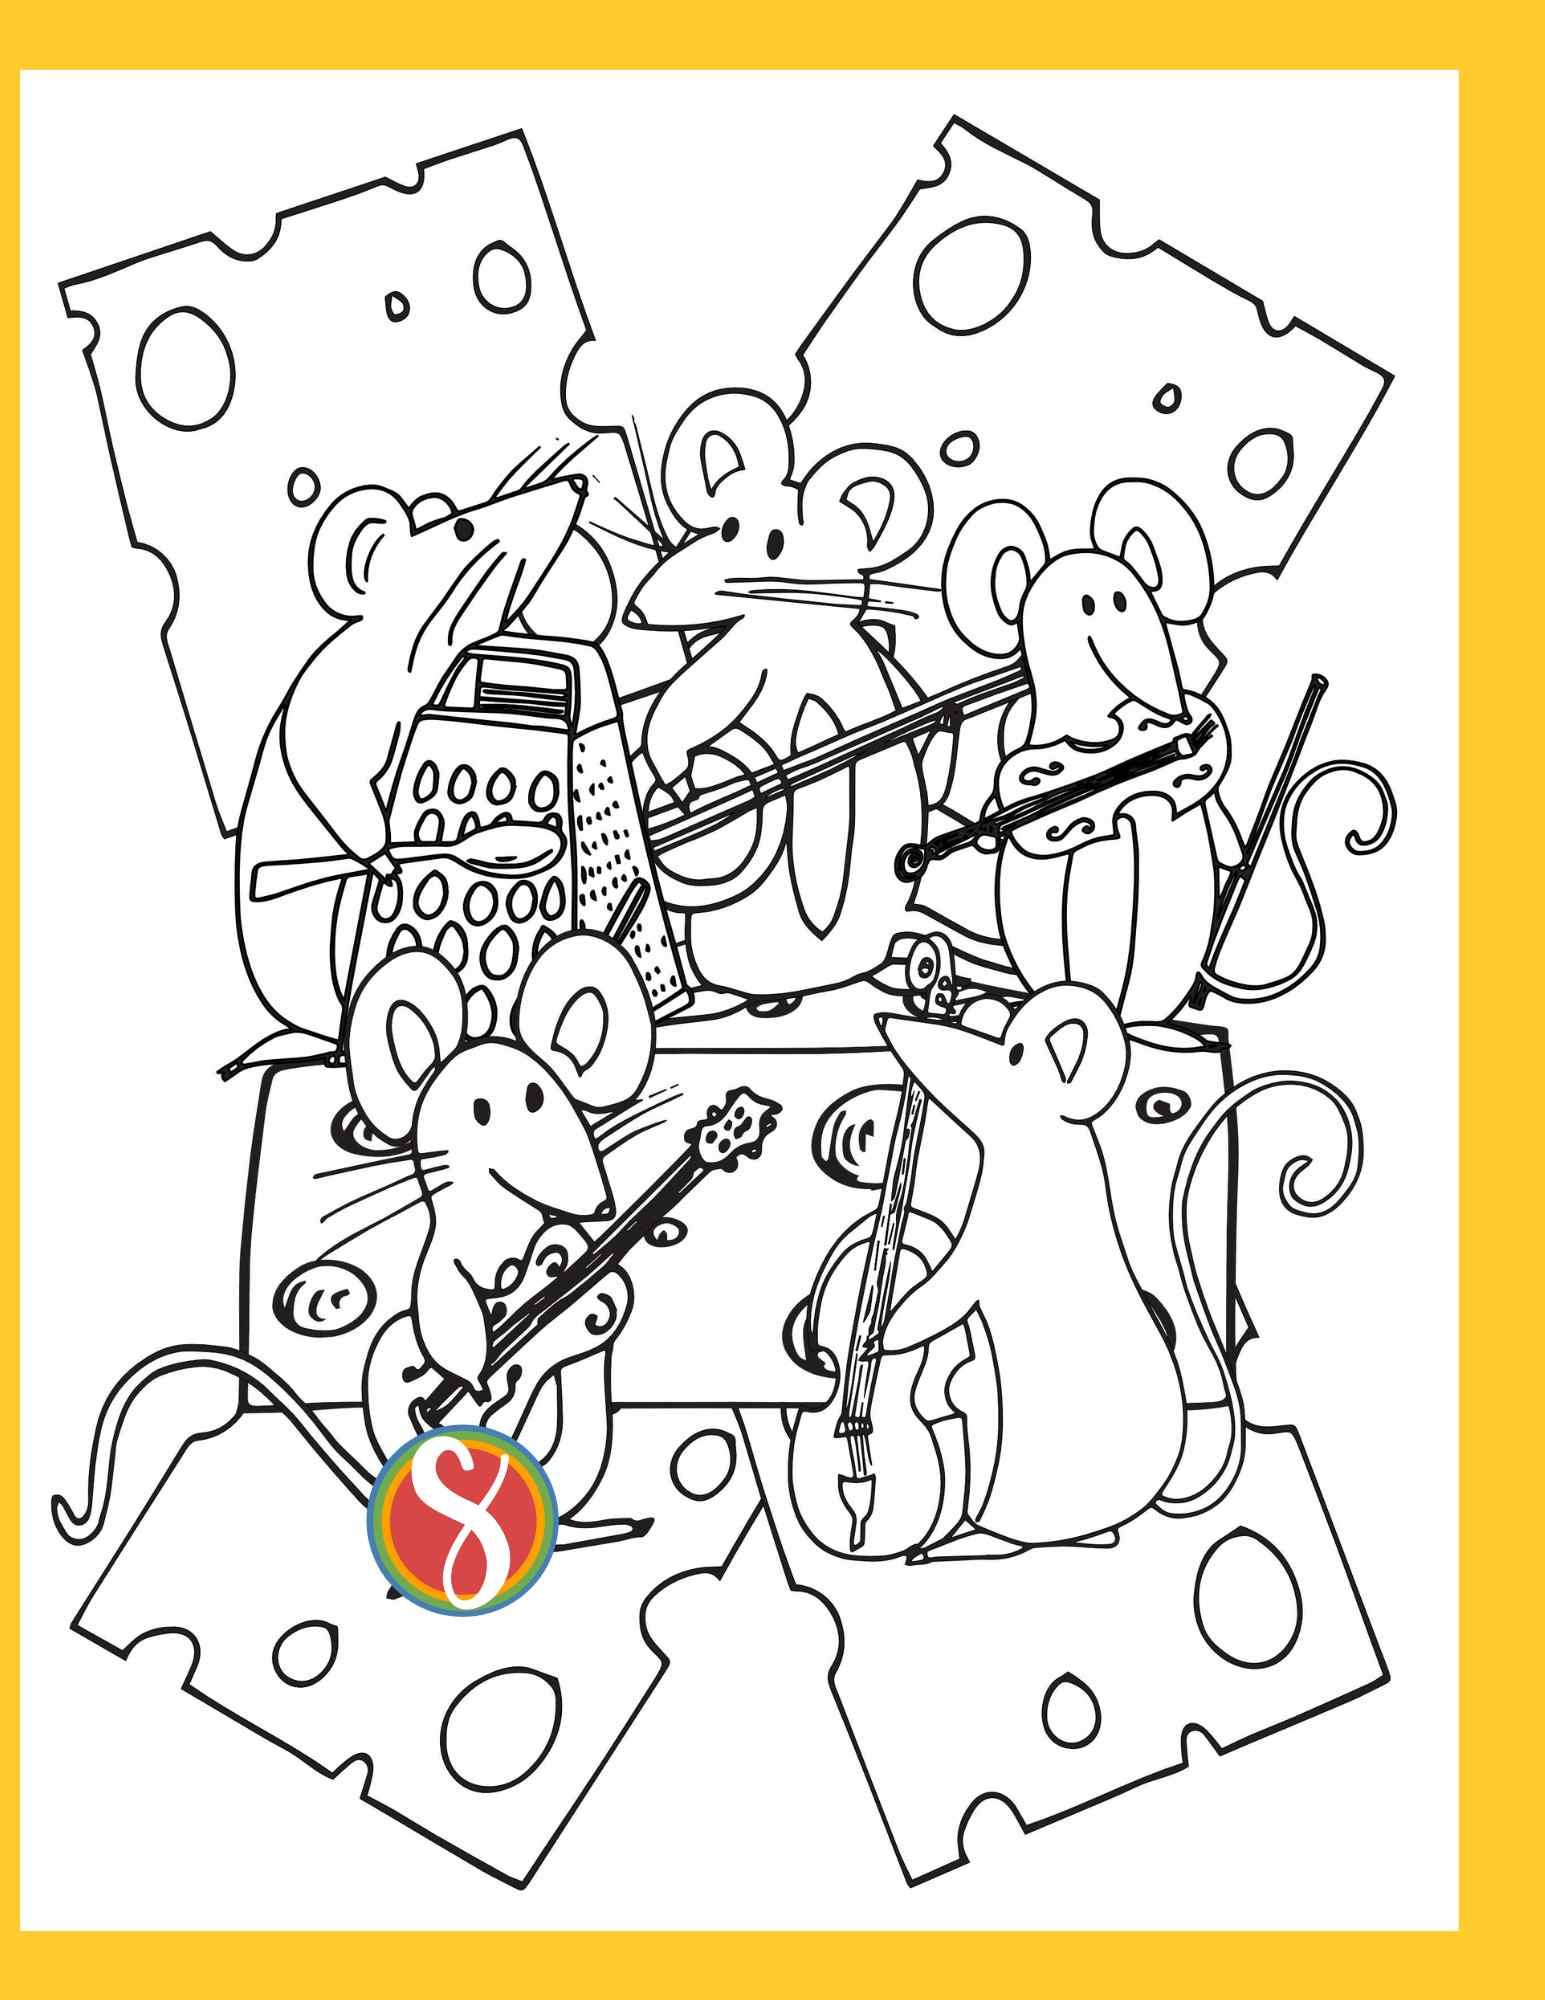 5 mice play various instruments on a background of cheese on a coloring page